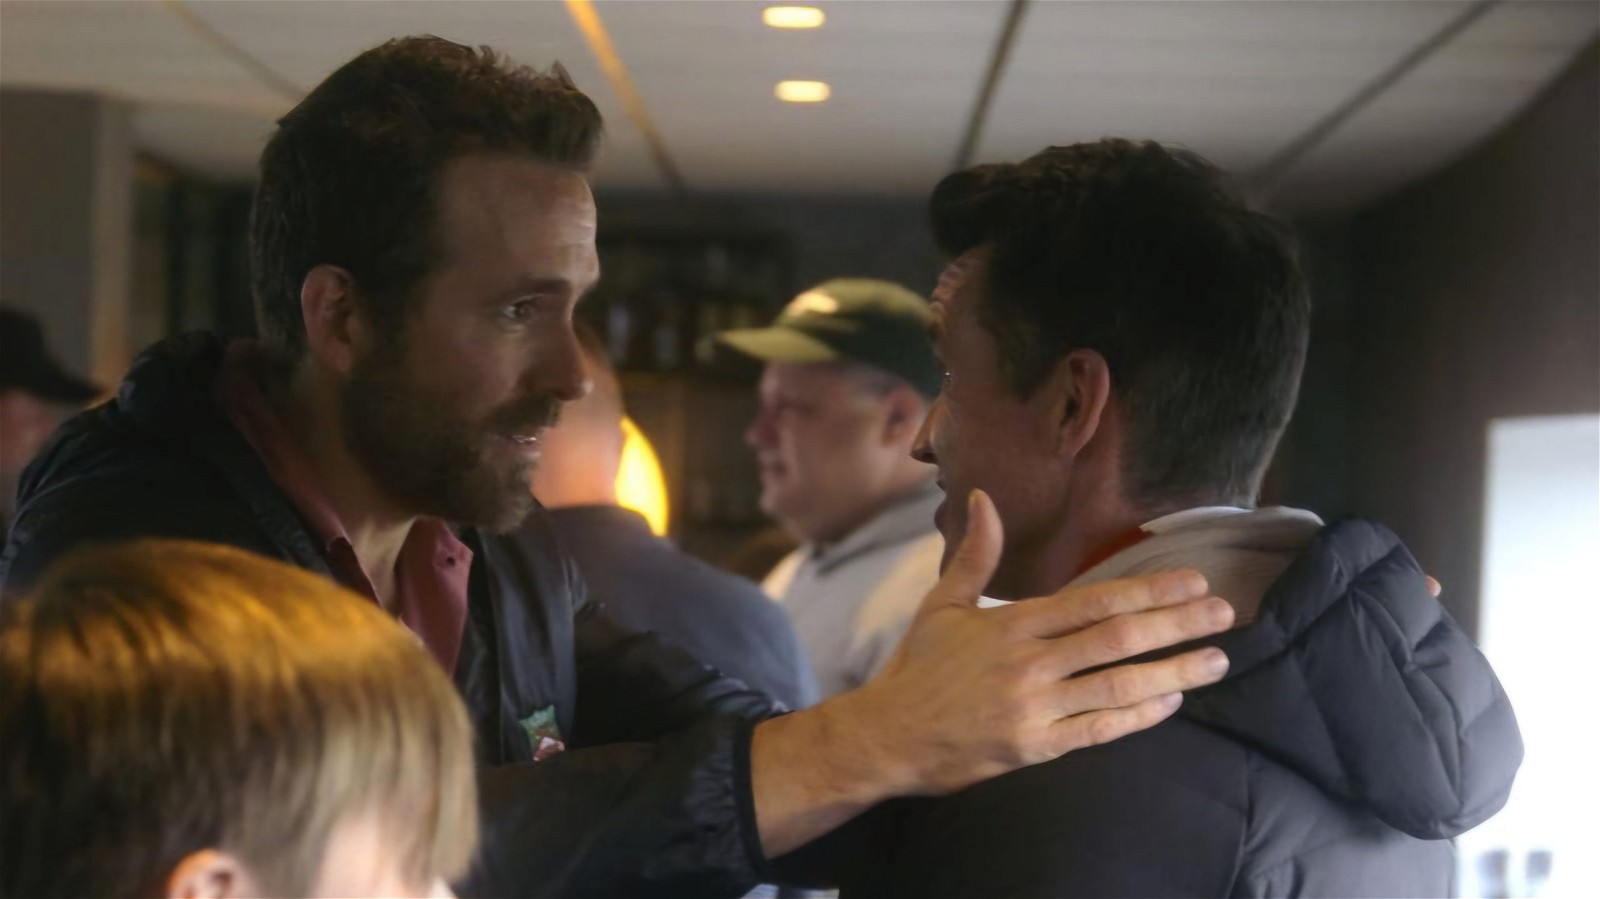 Ryan Reynolds and Rob McElhenney in FX's Welcome to Wrexham | Image via FX Press Room